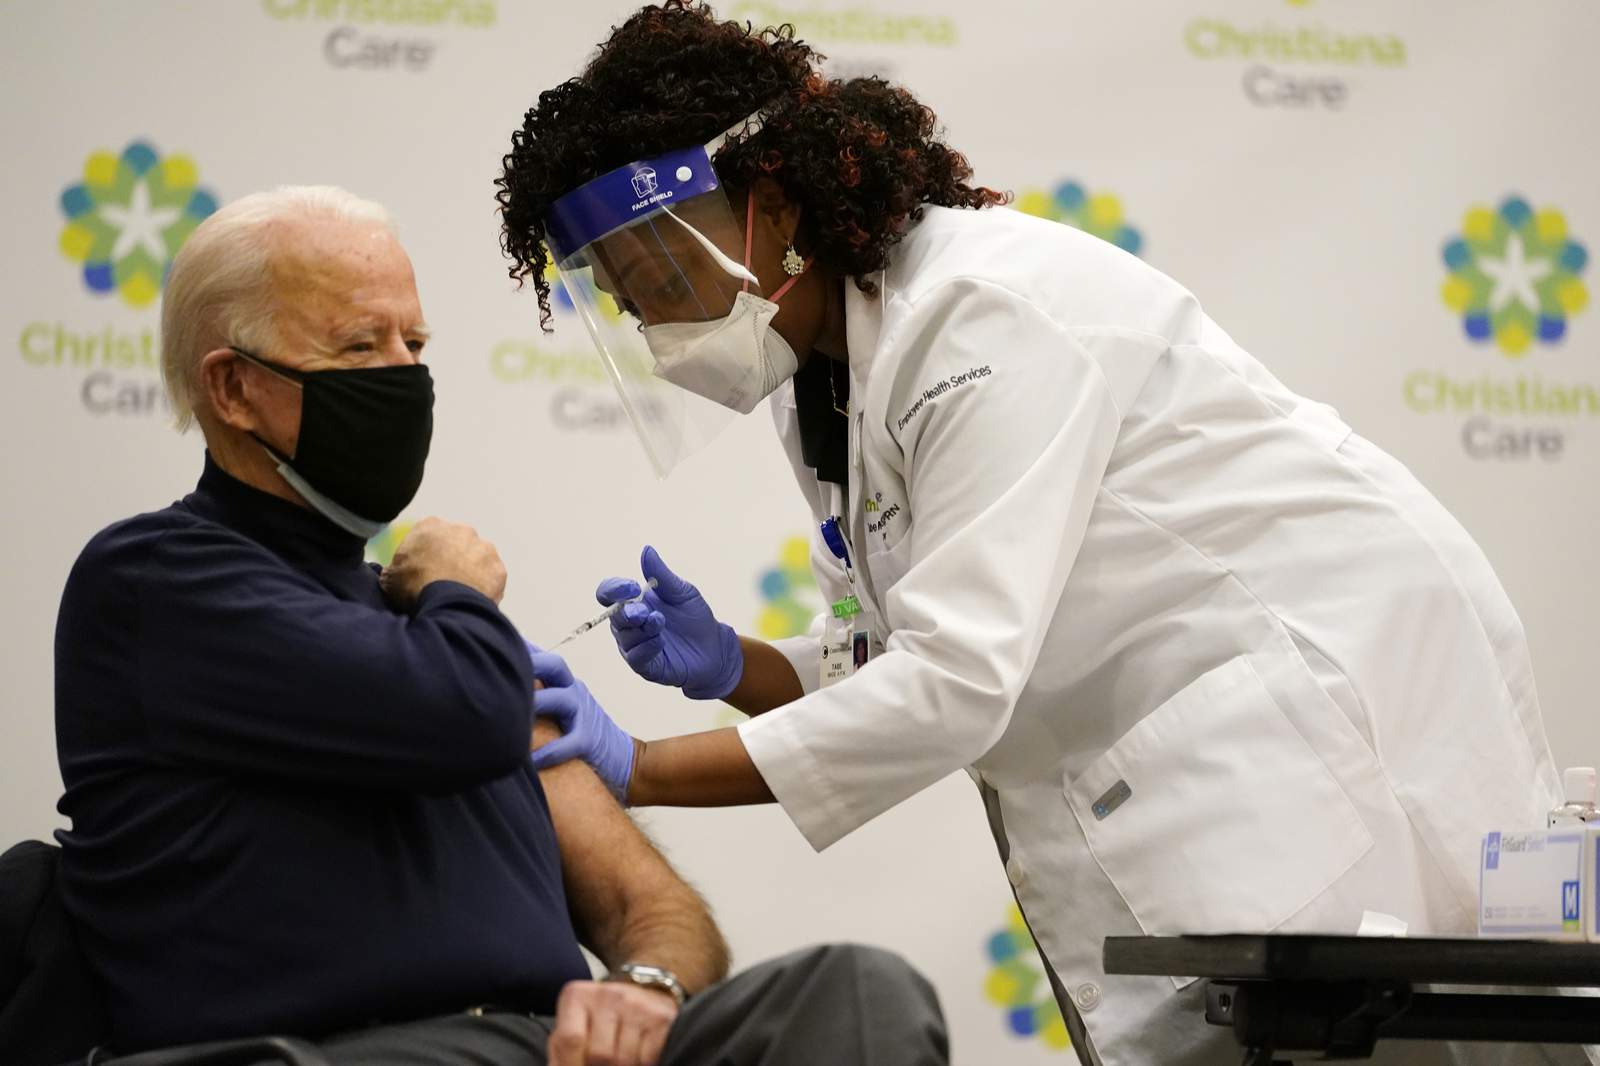 Biden gets COVID-19 vaccine, says 'nothing to worry about'